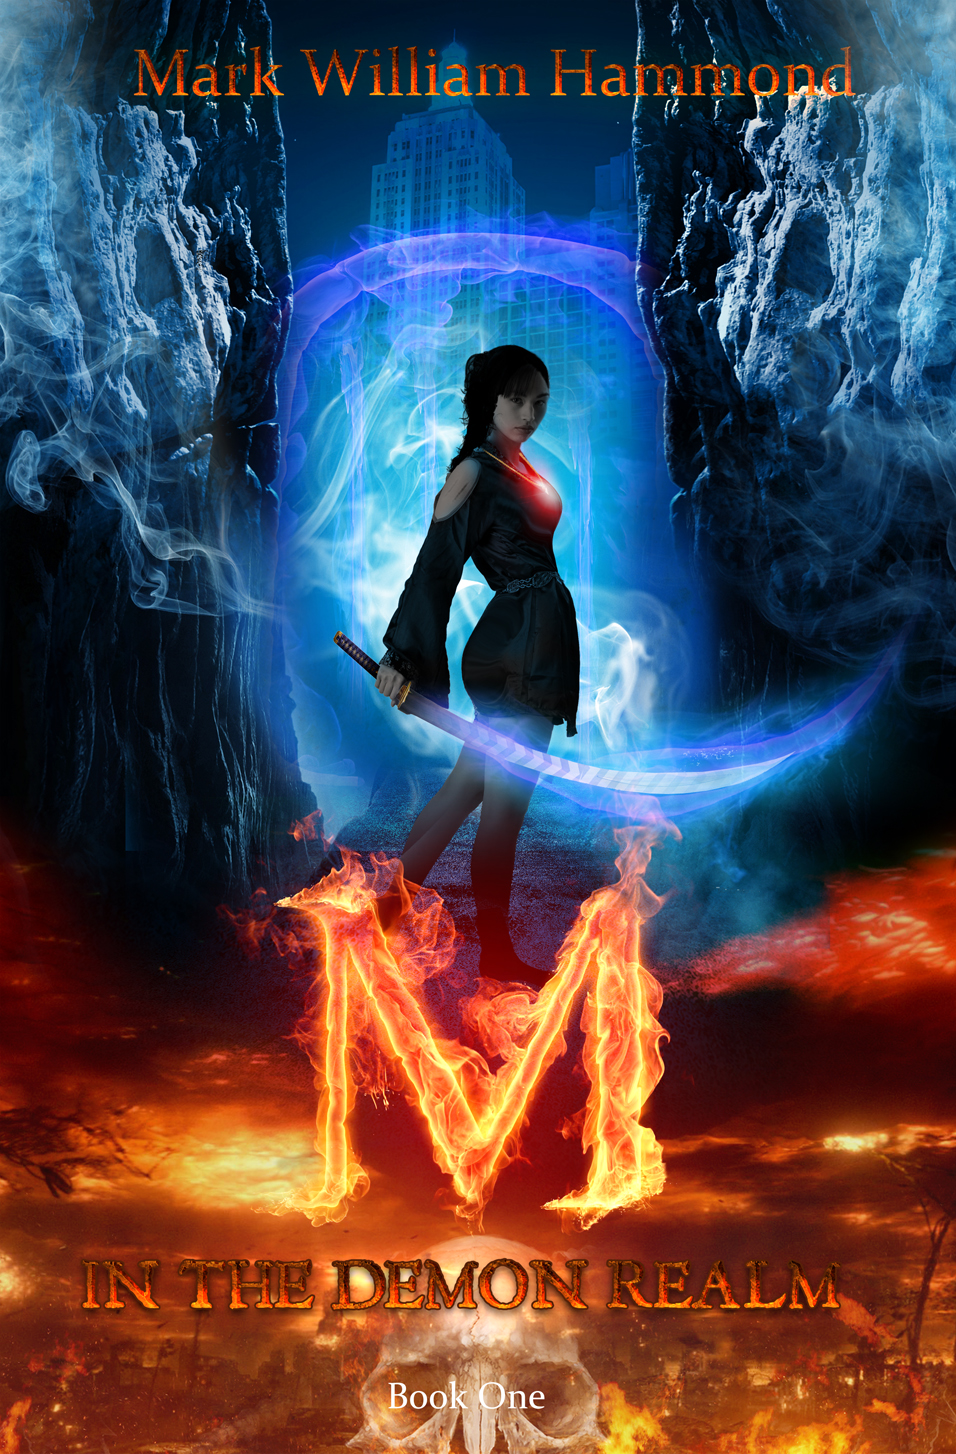 FREE: M in the Demon Realm by Mark William Hammond